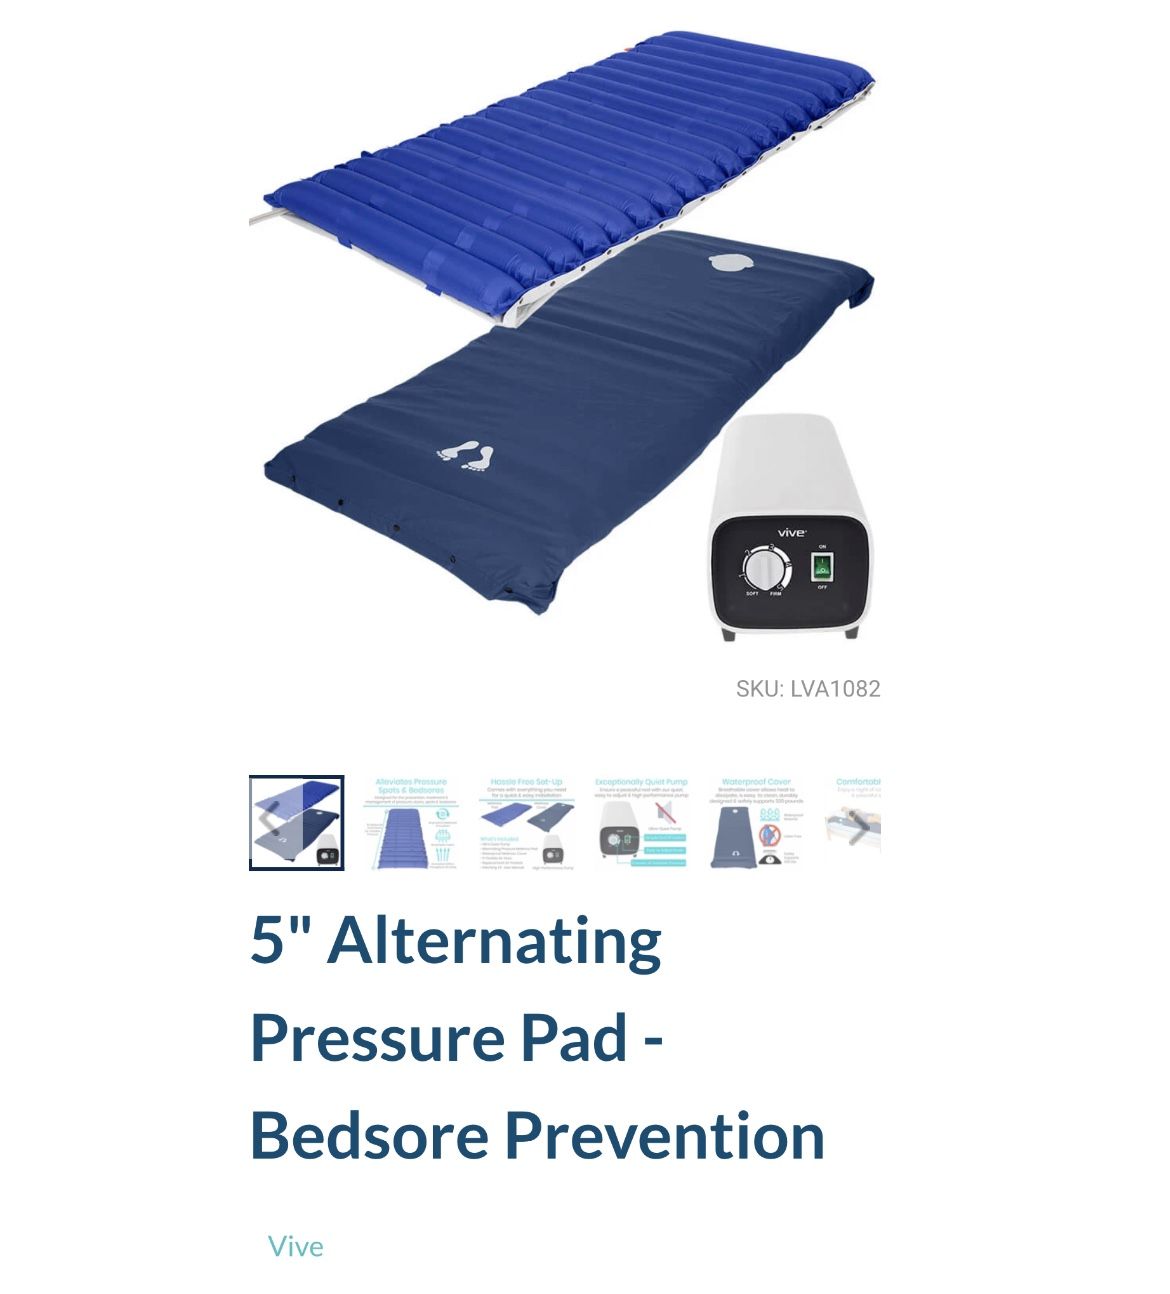 5" Alternating Pressure Pad - Bedsore Prevention from Vive Health